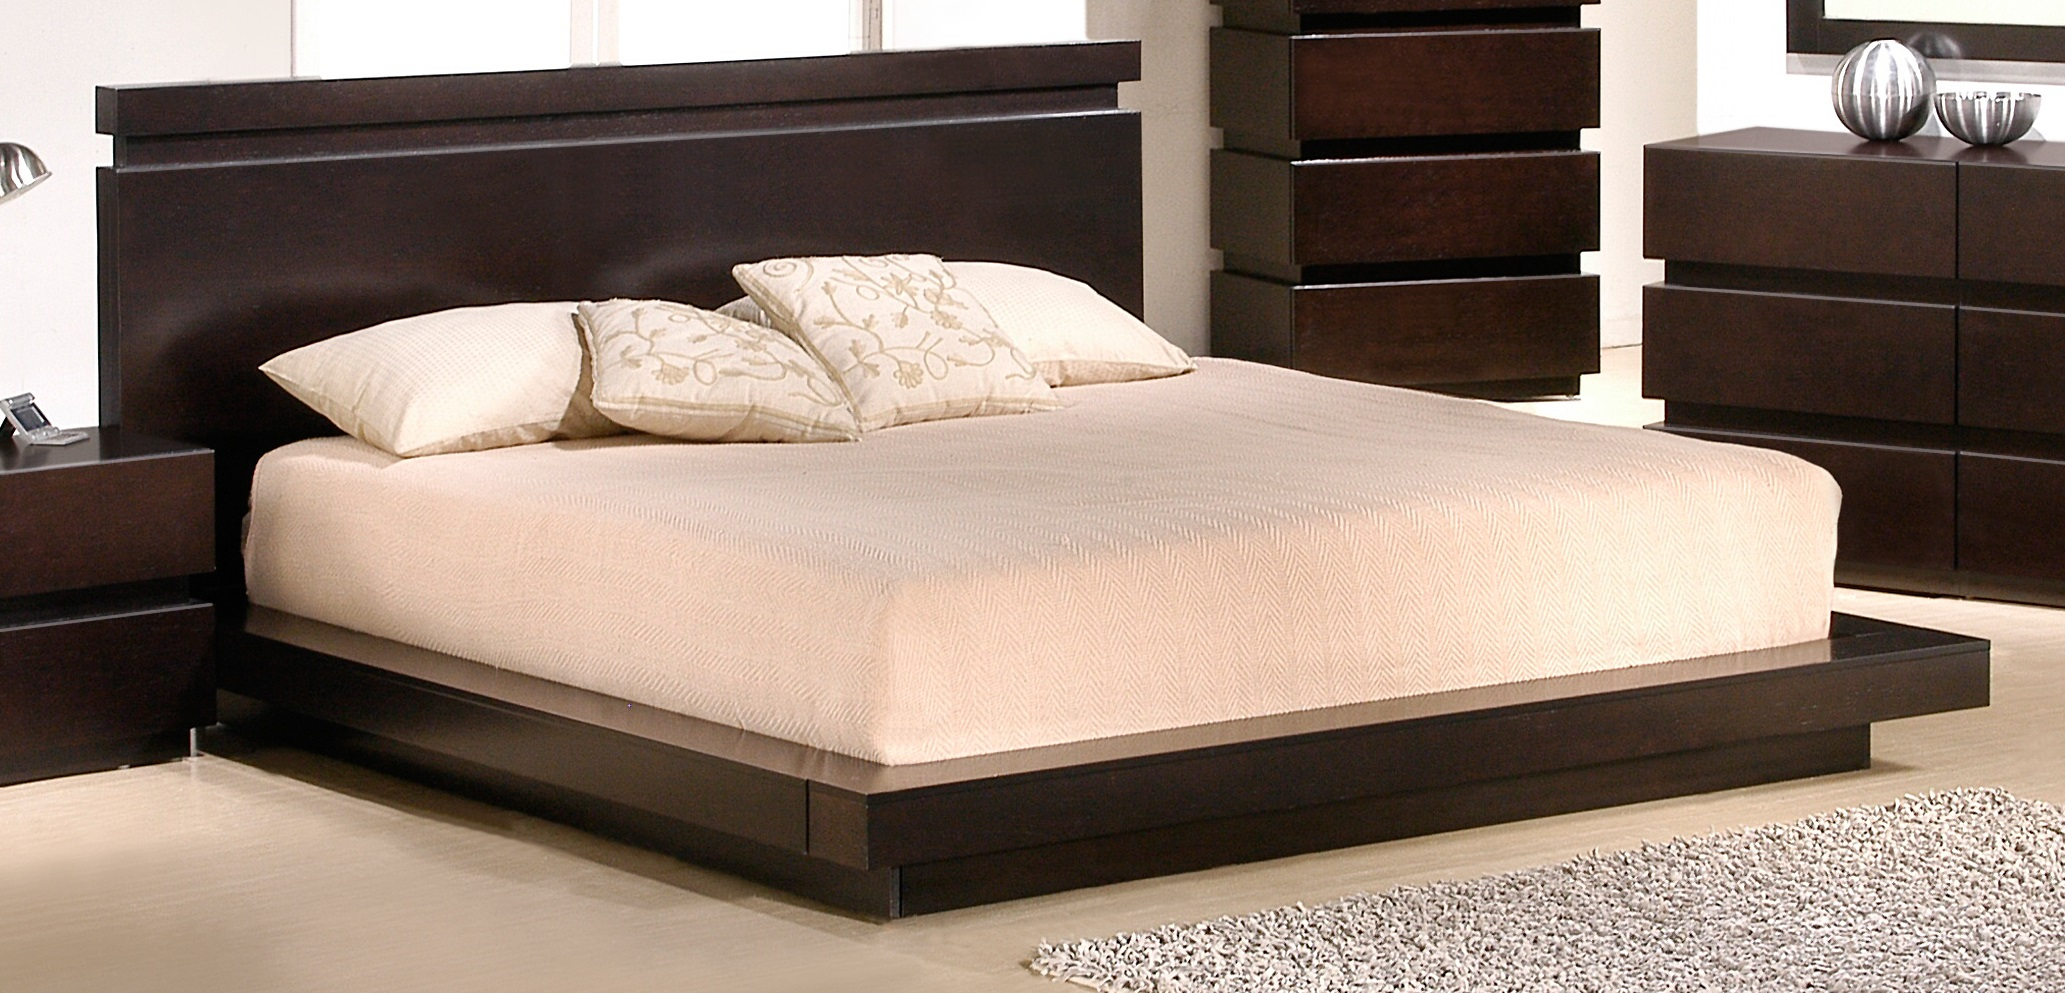 Jm Knotch King Panel Bed In Expresso 1754426 K in sizing 2065 X 993